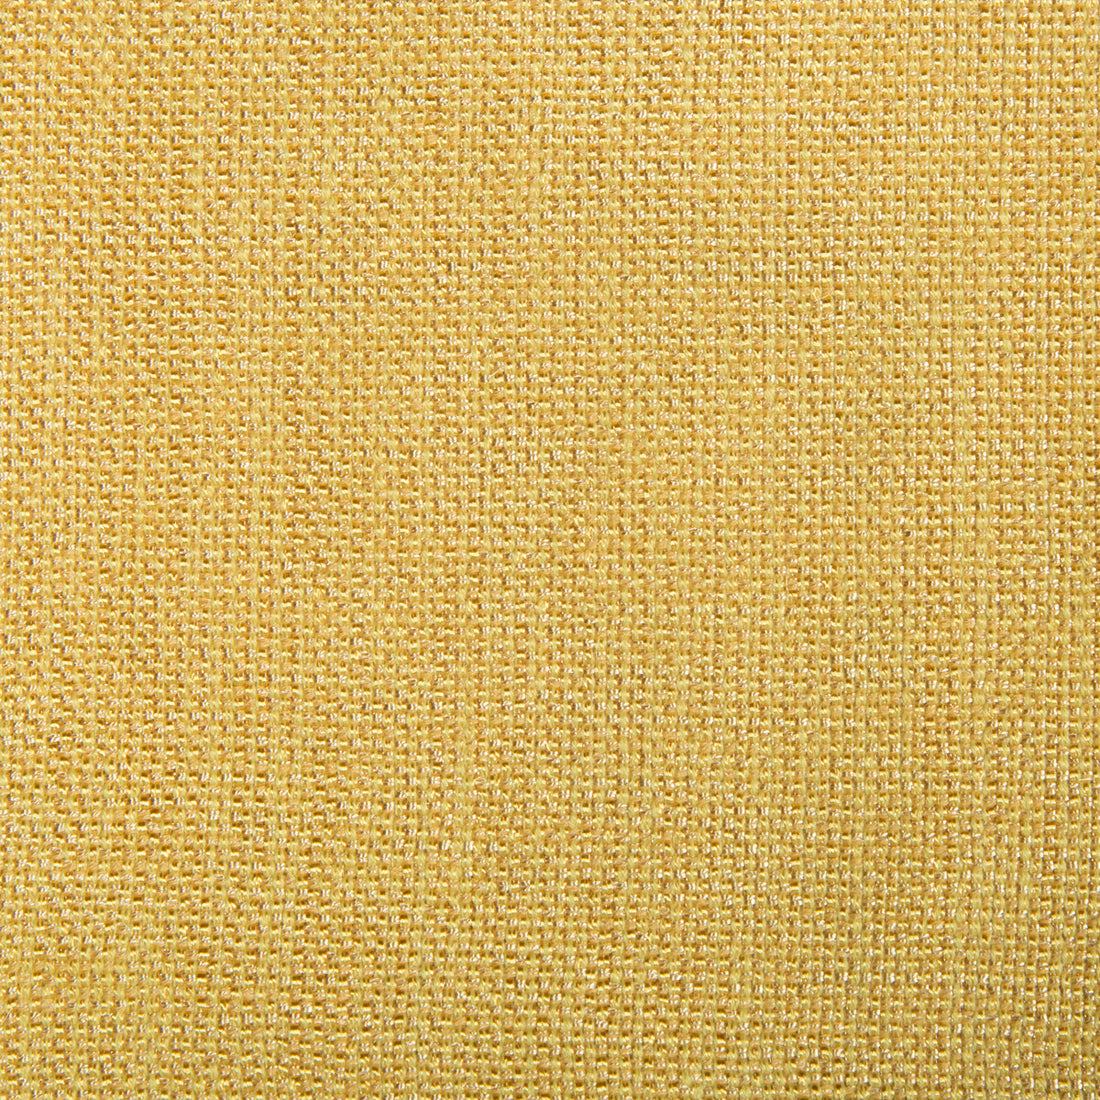 Kravet Contract fabric in 34926-14 color - pattern 34926.14.0 - by Kravet Contract